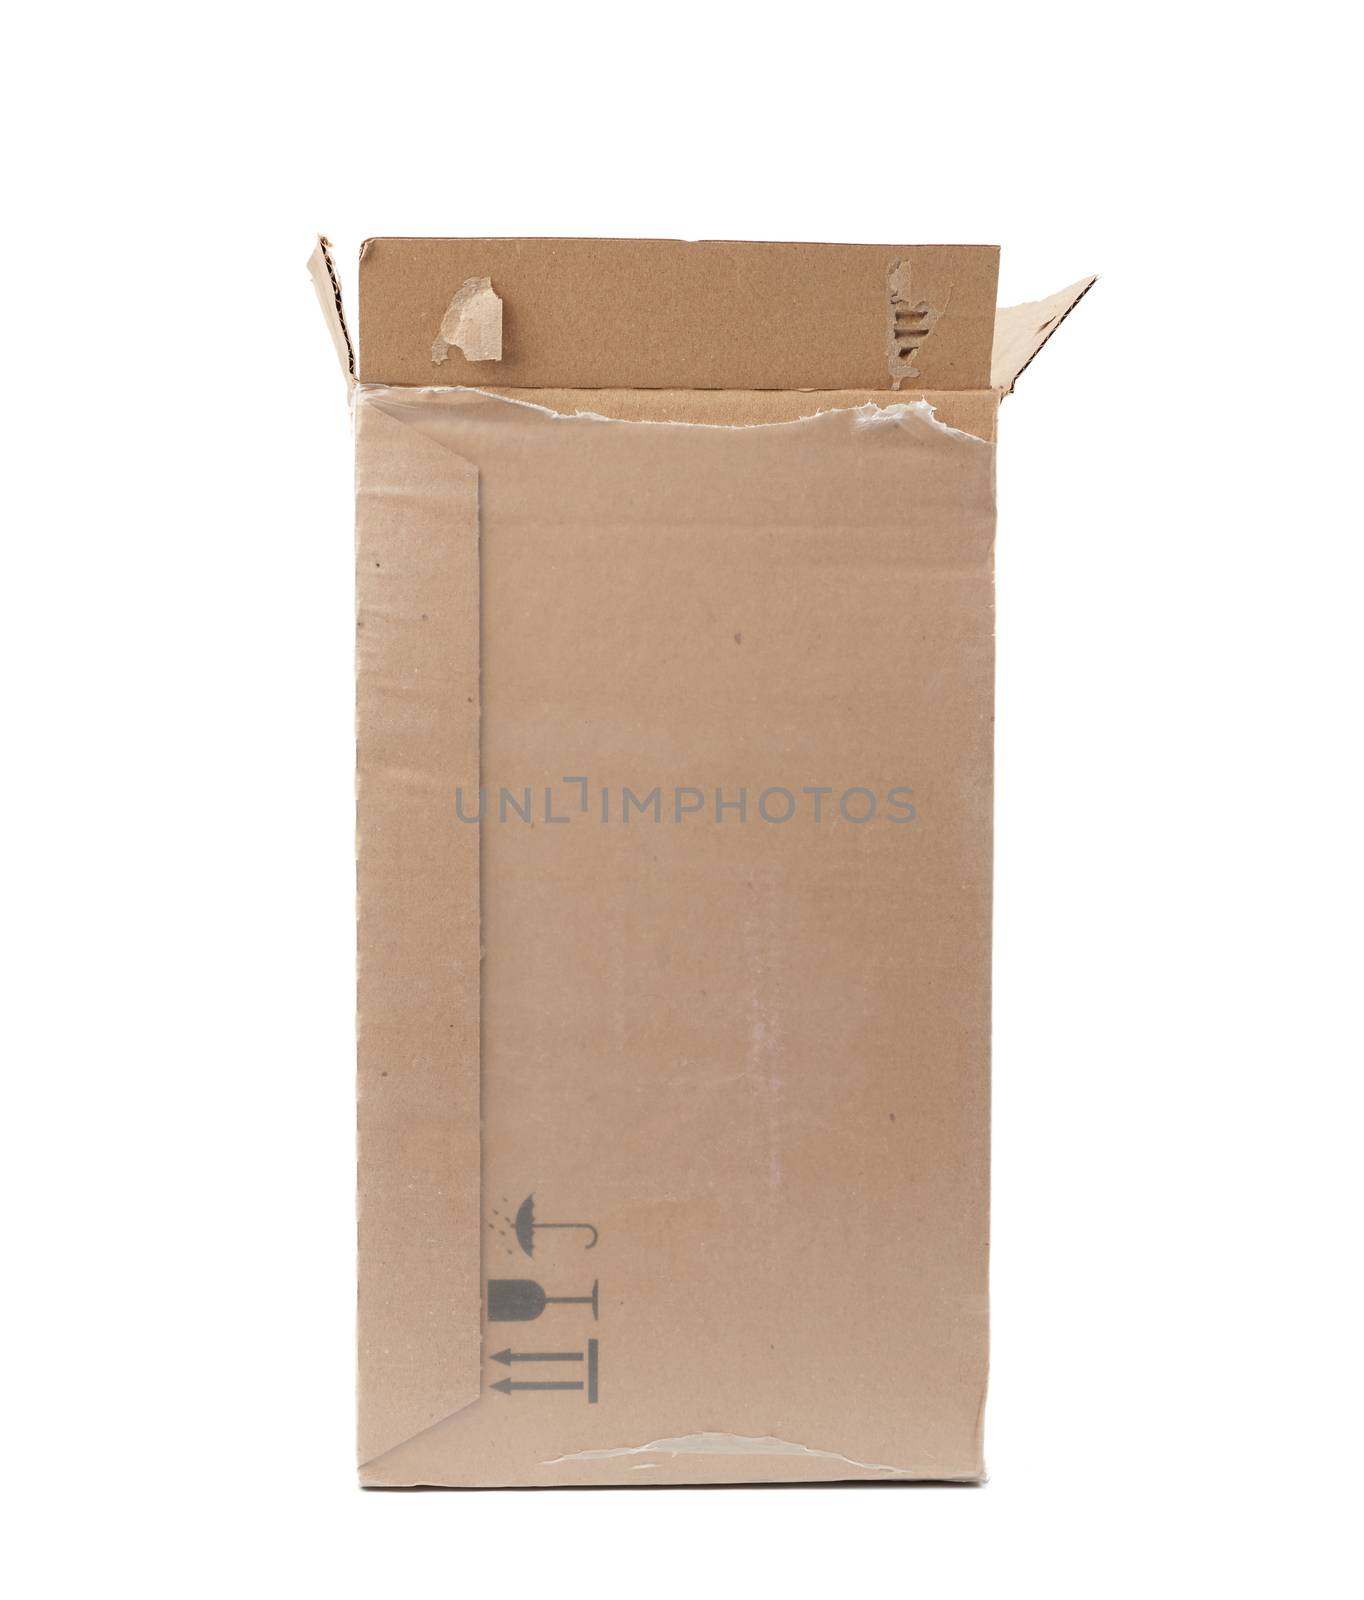 rectangular box wrapped in transparent polyethylene, box for transporting bottles, side view